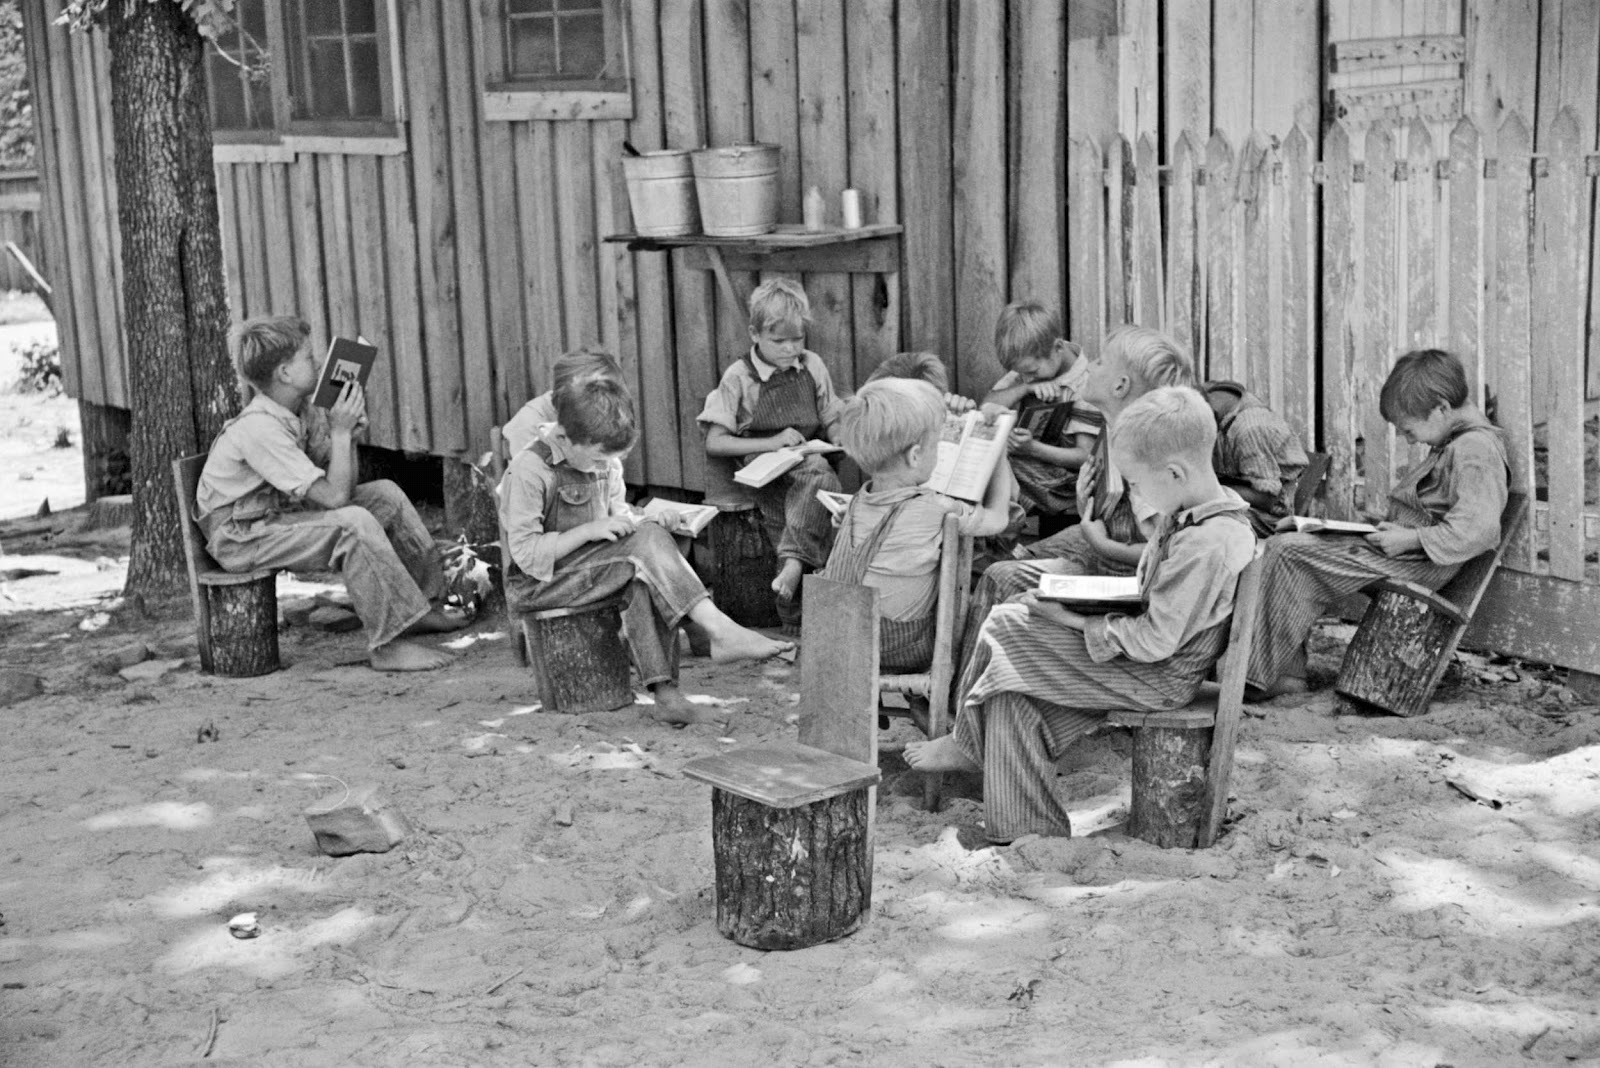 Schoolboys reading books in an outdoor classroom for migrant children at Skyline Farms, near Scottsboro, Alabama June 1936